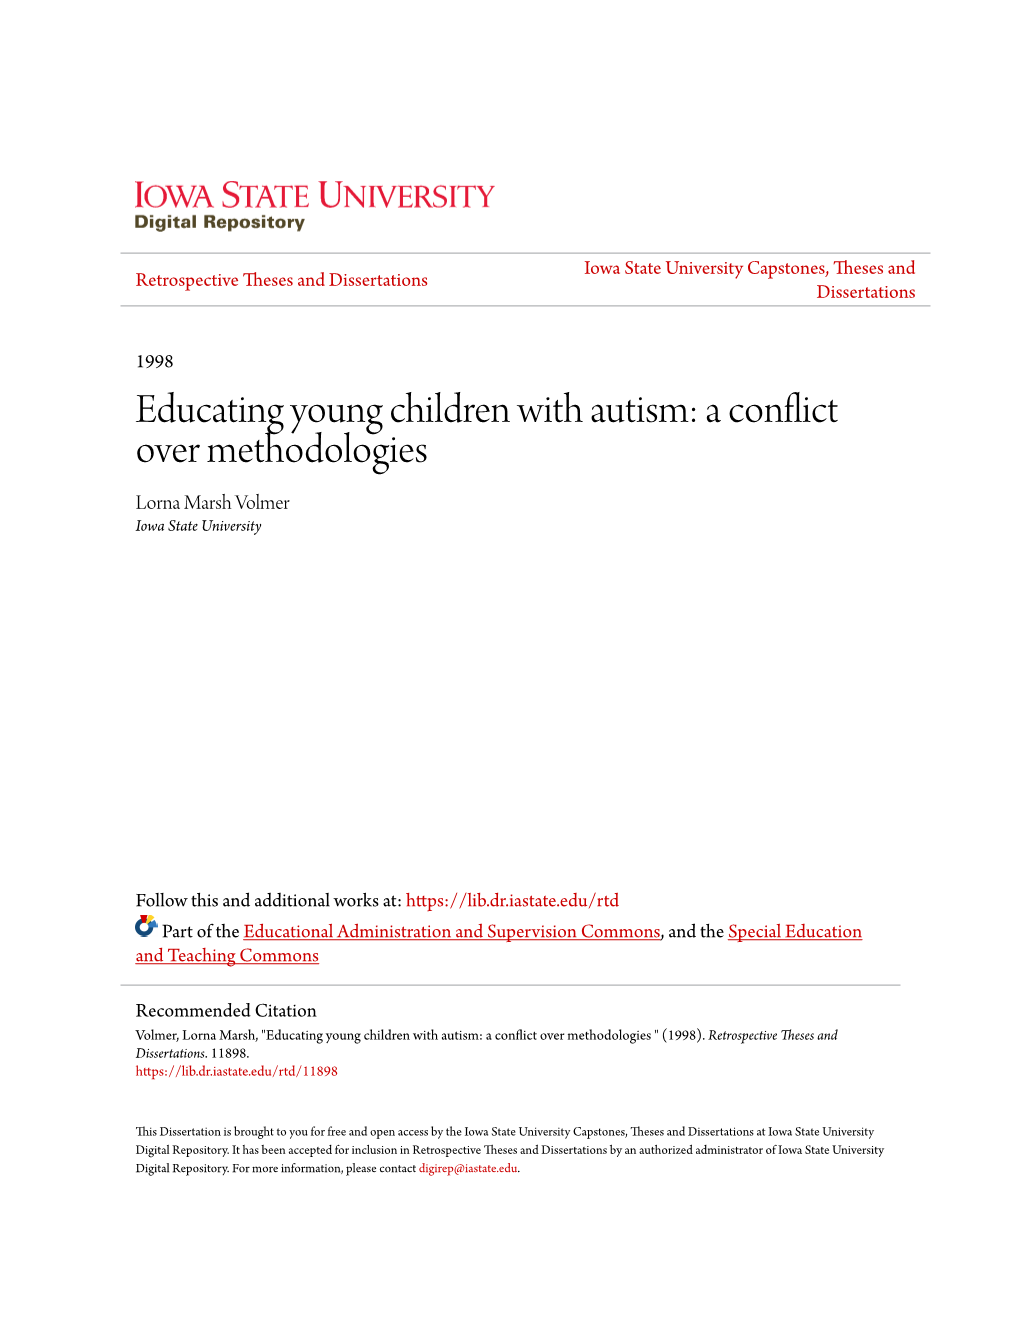 Educating Young Children with Autism: a Conflict Over Methodologies Lorna Marsh Volmer Iowa State University